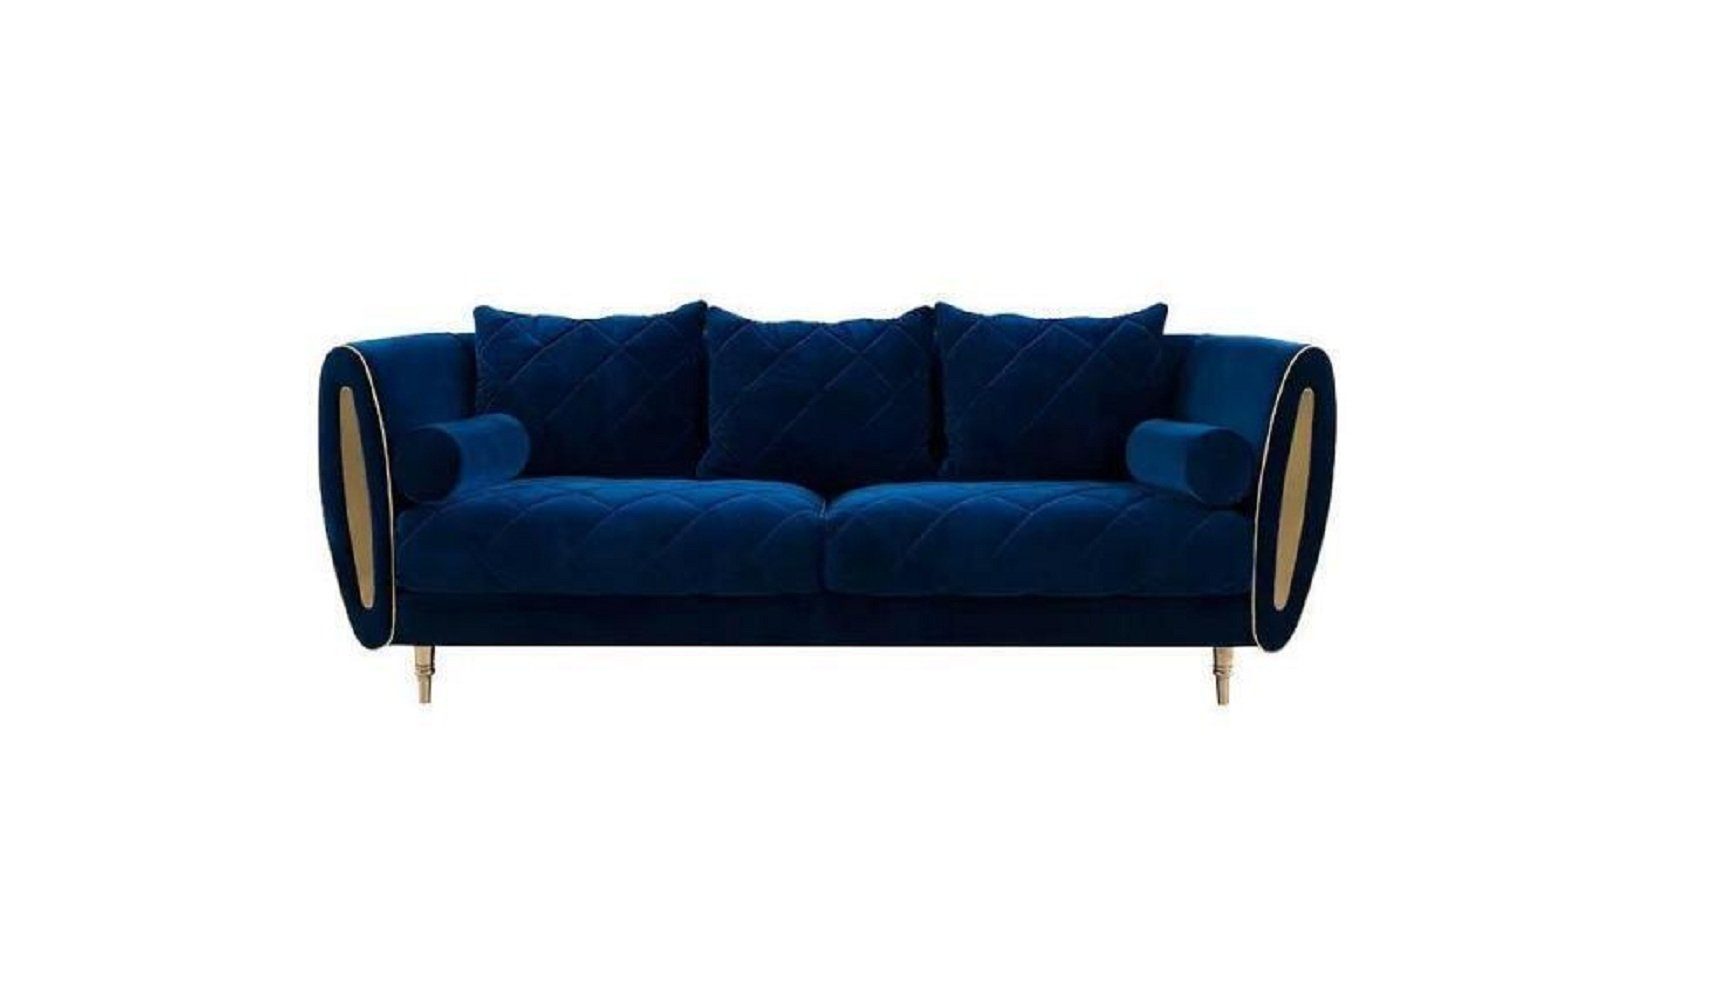 JVmoebel 2-Sitzer Design Blau 2 Sitzer Relax Sofas Sofa Textil Polster Couch Stoff, 1 Teile, Made in Europa